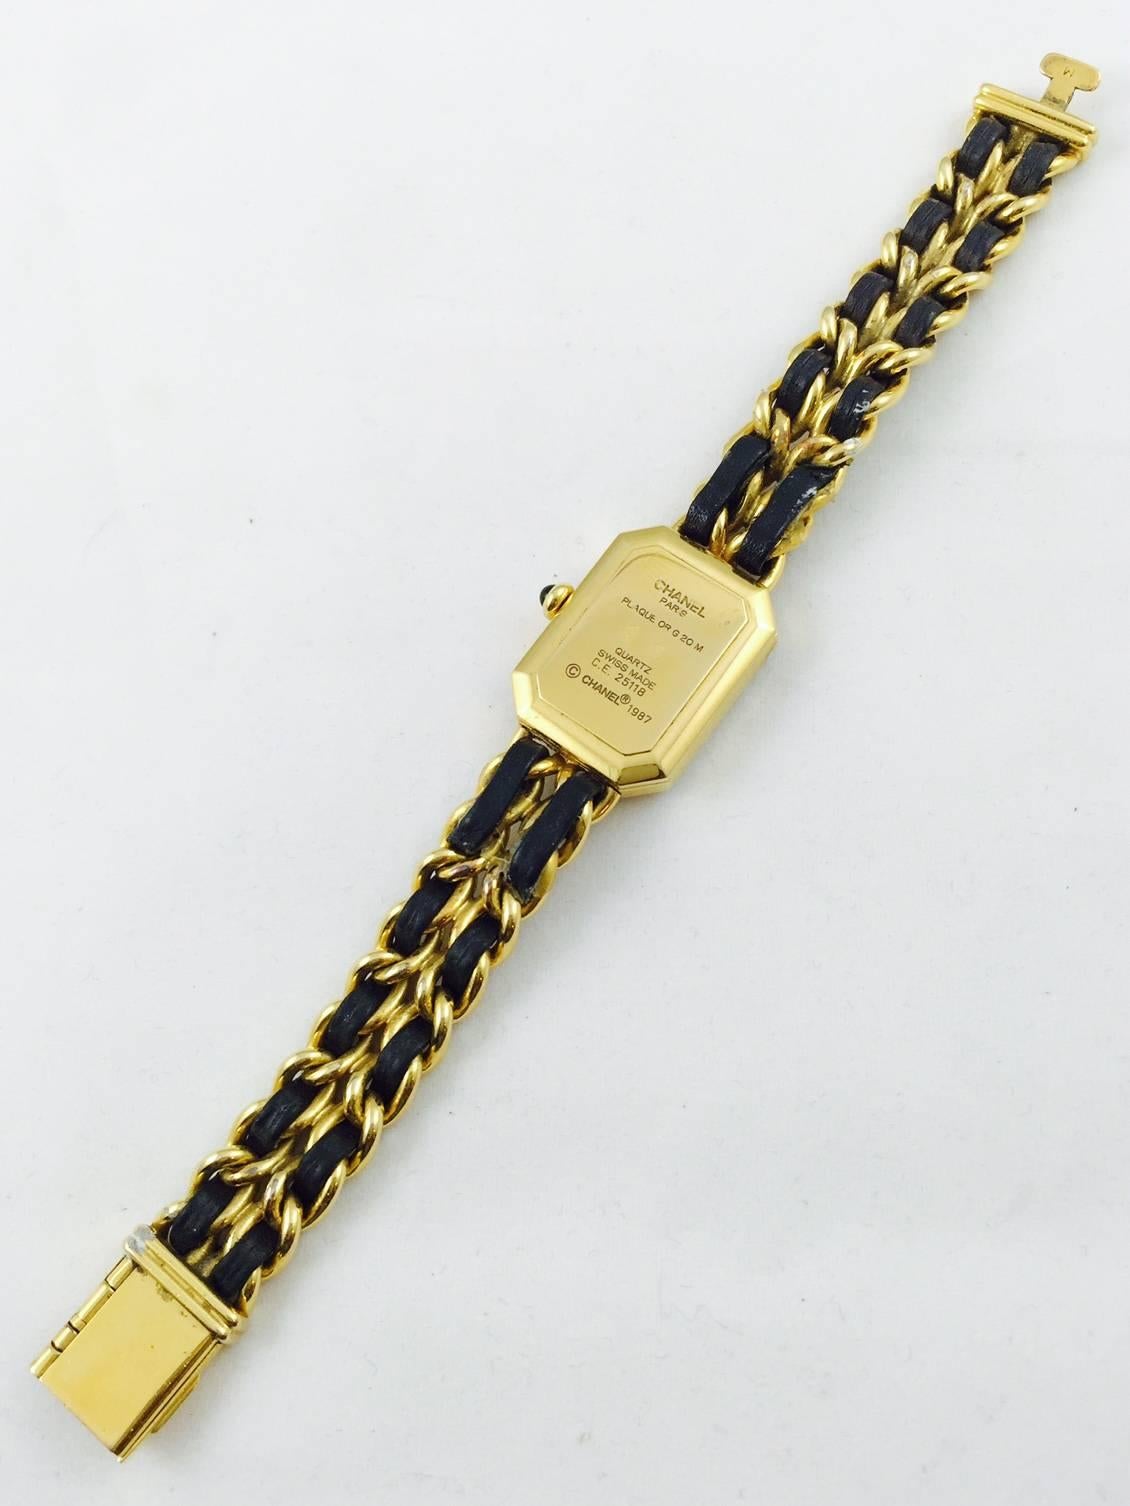 Gold Tone Premiere Watch is Chanel's longest selling and highly coveted timepiece.  No wonder!  Features white detail against matte black face, faceted sapphire glass crystal, and elliptical hands.  Gold-filled case, case back, crown base, clasp and